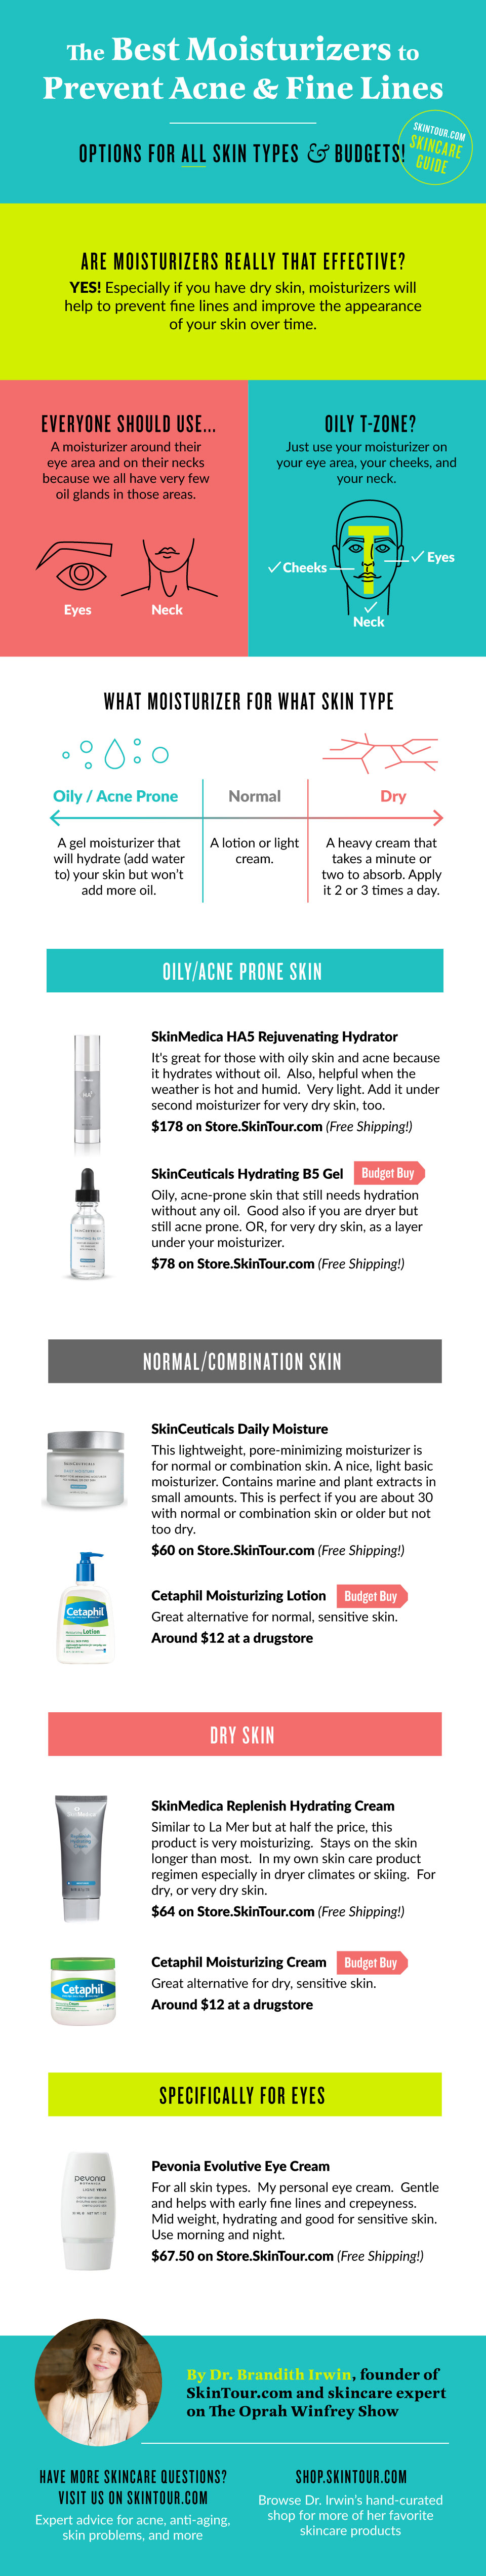 Prevent acne and fine lines with the right moisturizer! A guide to the best moisturizers for your skin type...